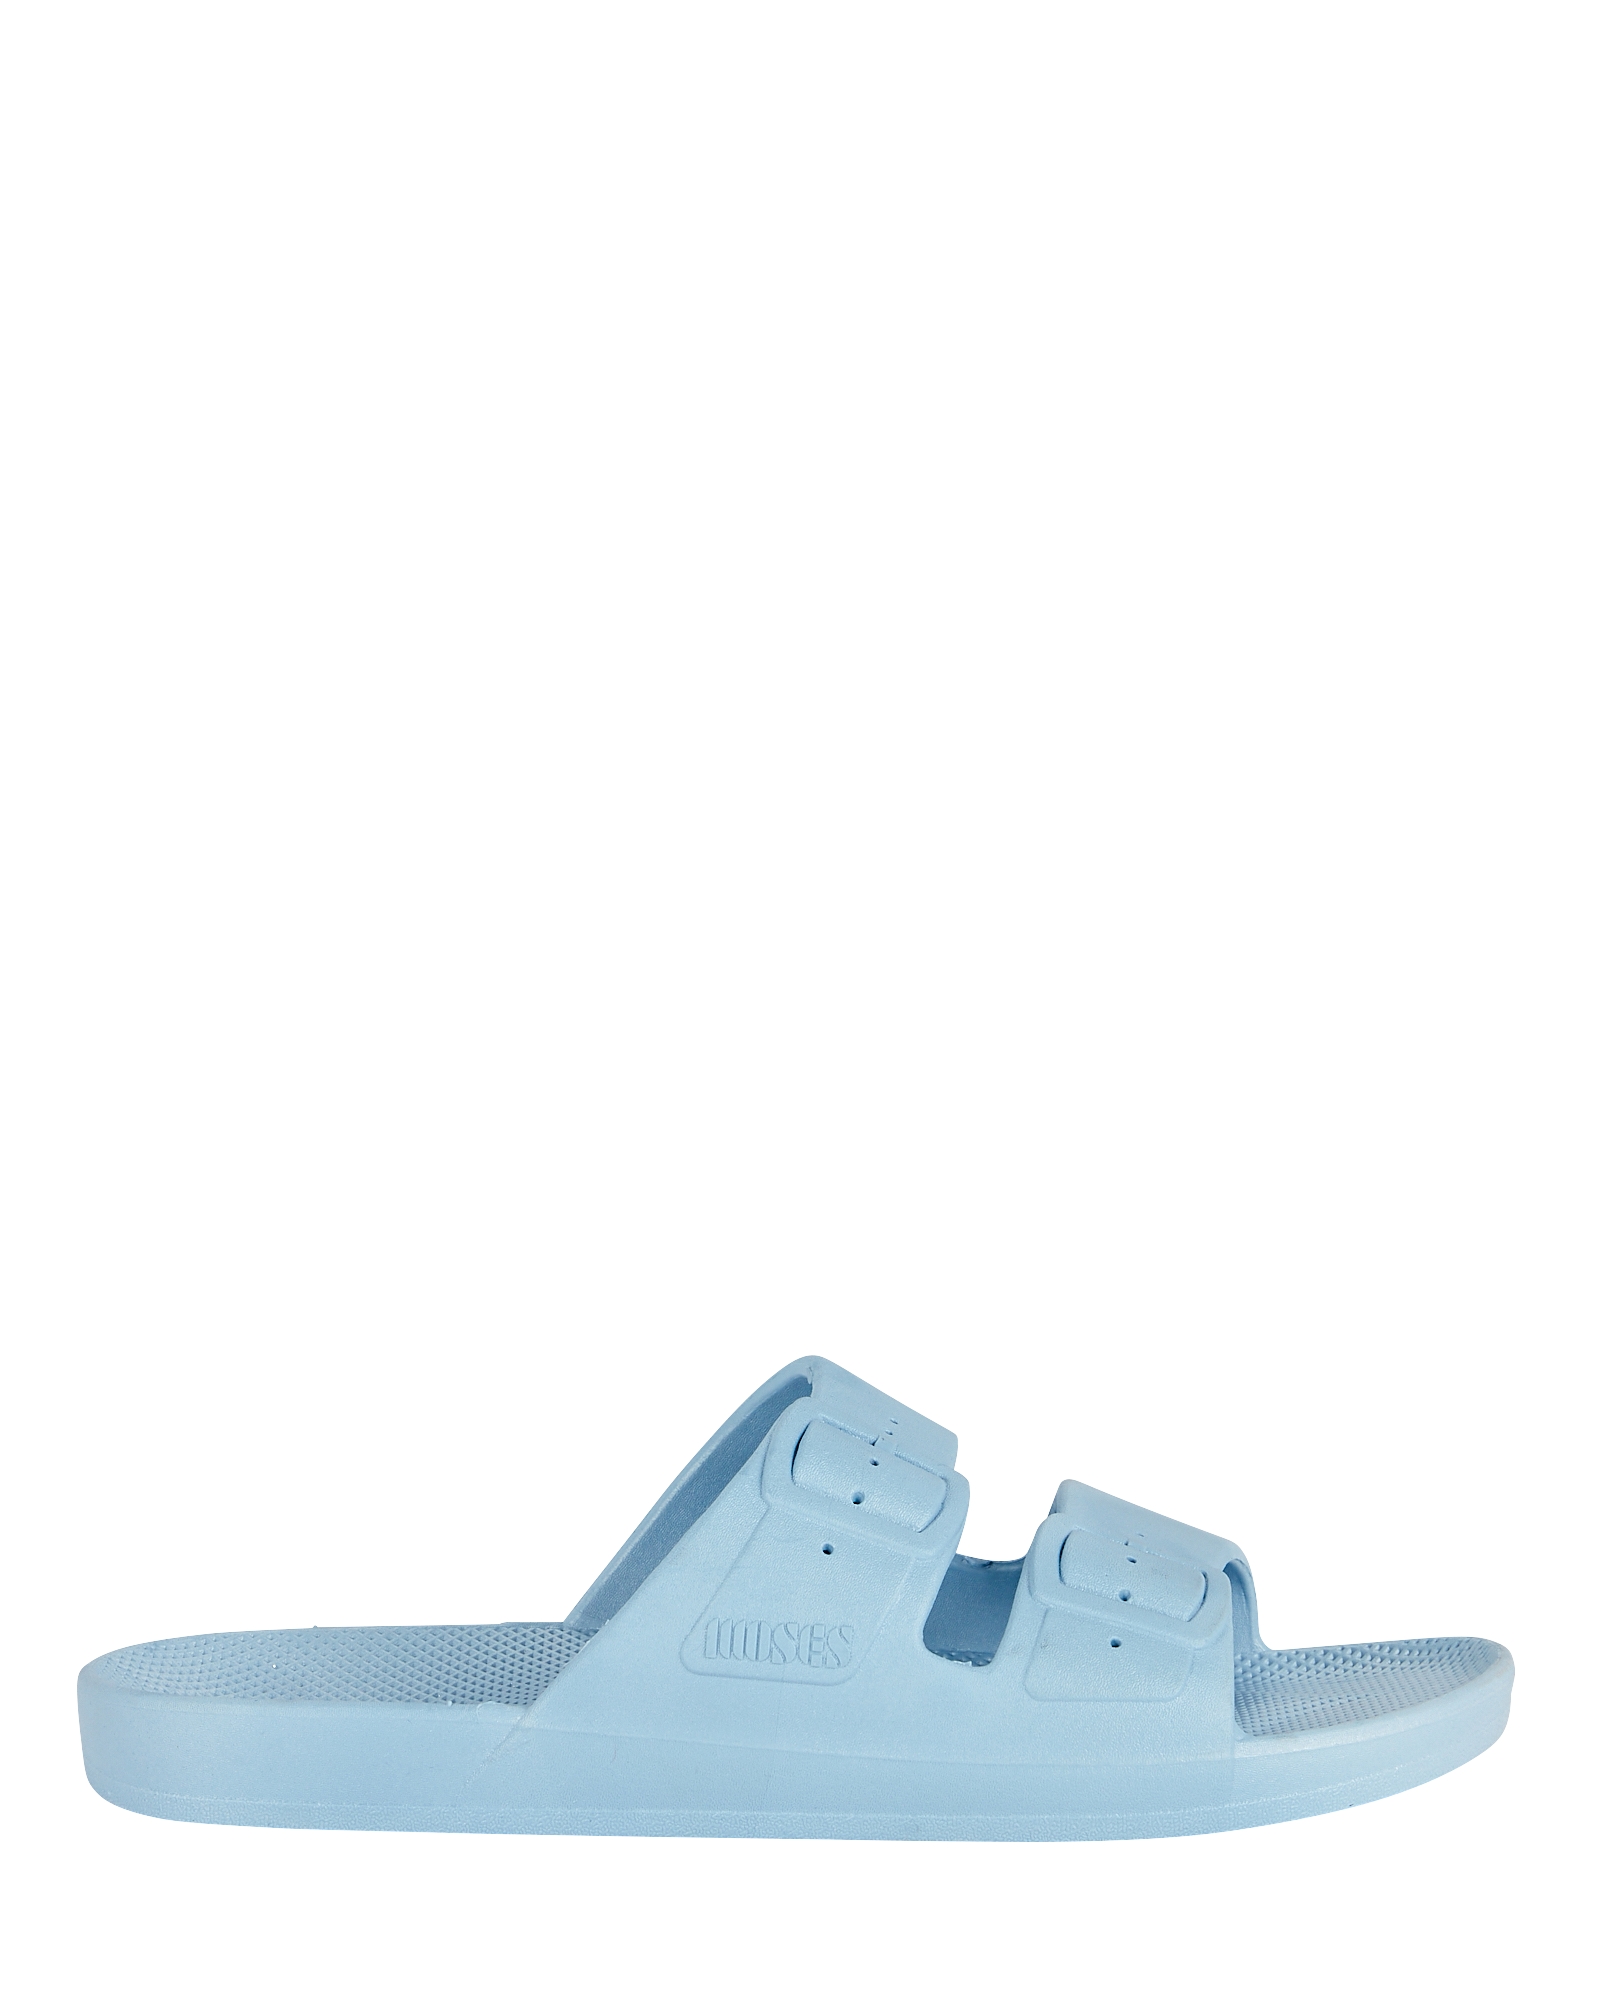 Freedom Moses Lagoon Moses Two Band Slide | INTERMIX®